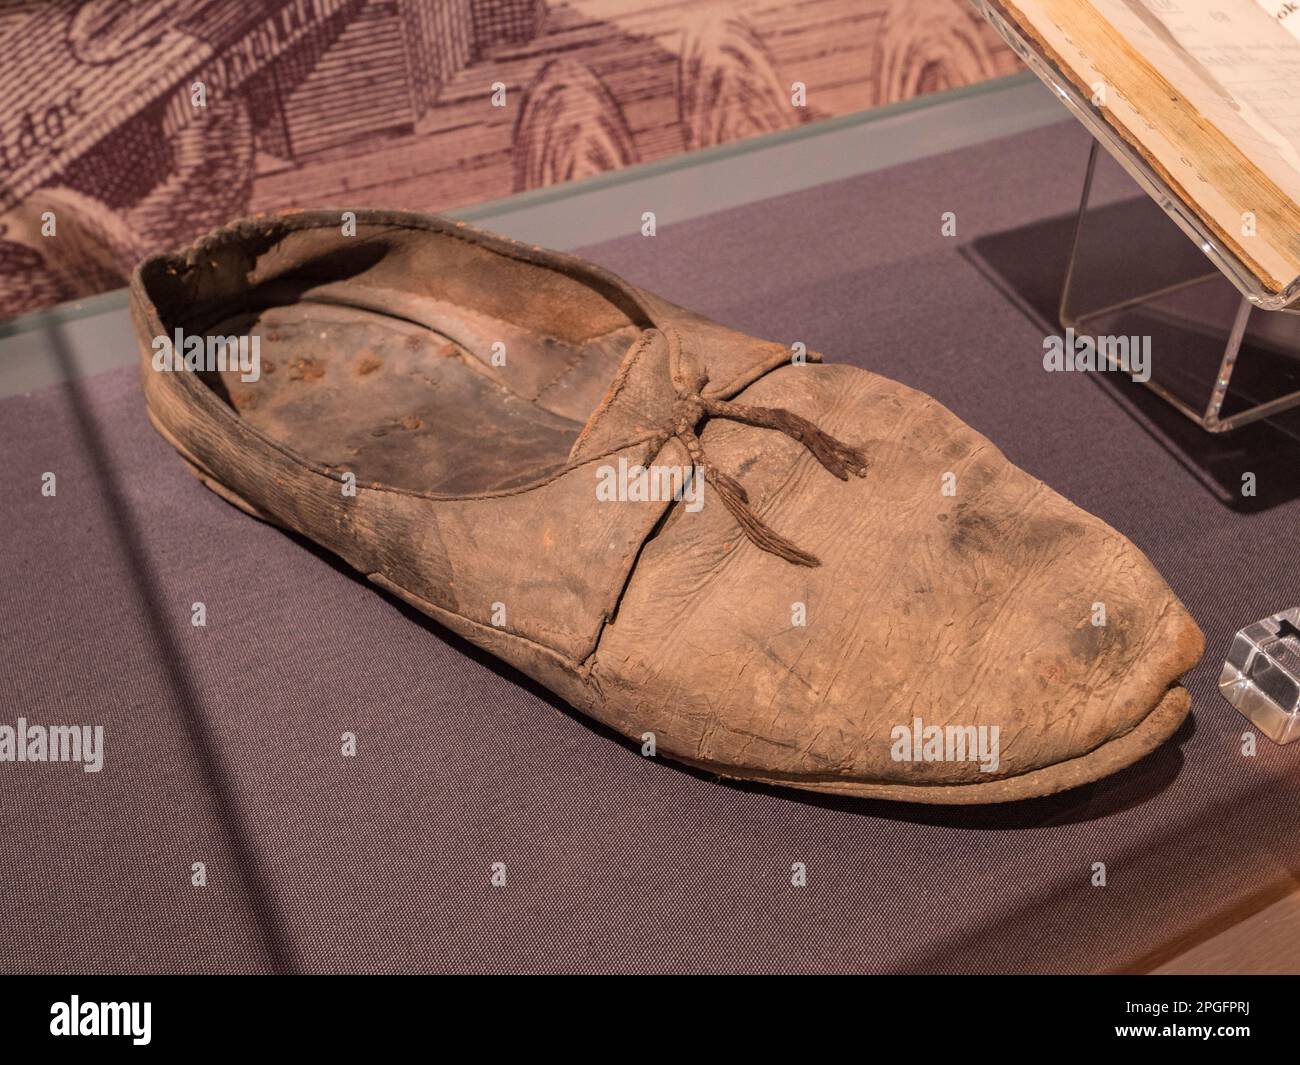 A concealed shoe (18th century) hidden in the Fitted Rigging House (*) on display in the Ropery Gallery, Historic Dockyard Chatham, Kent, UK. Stock Photo